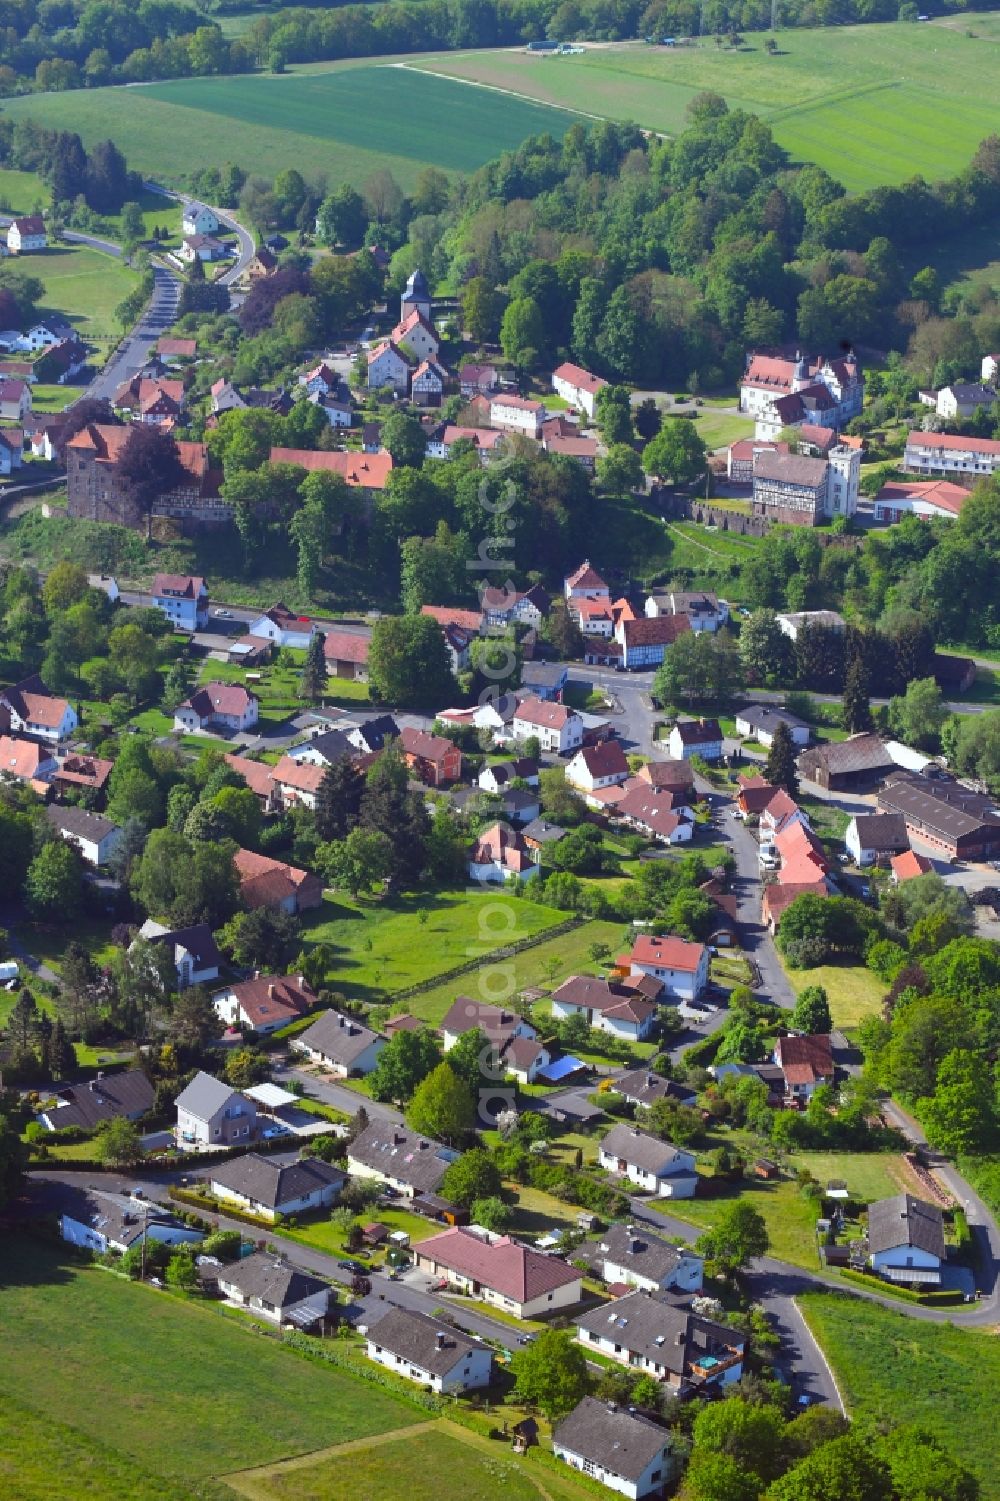 Aerial image Buchenau - Village - view on the edge of forested areas in Buchenau in the state Hesse, Germany